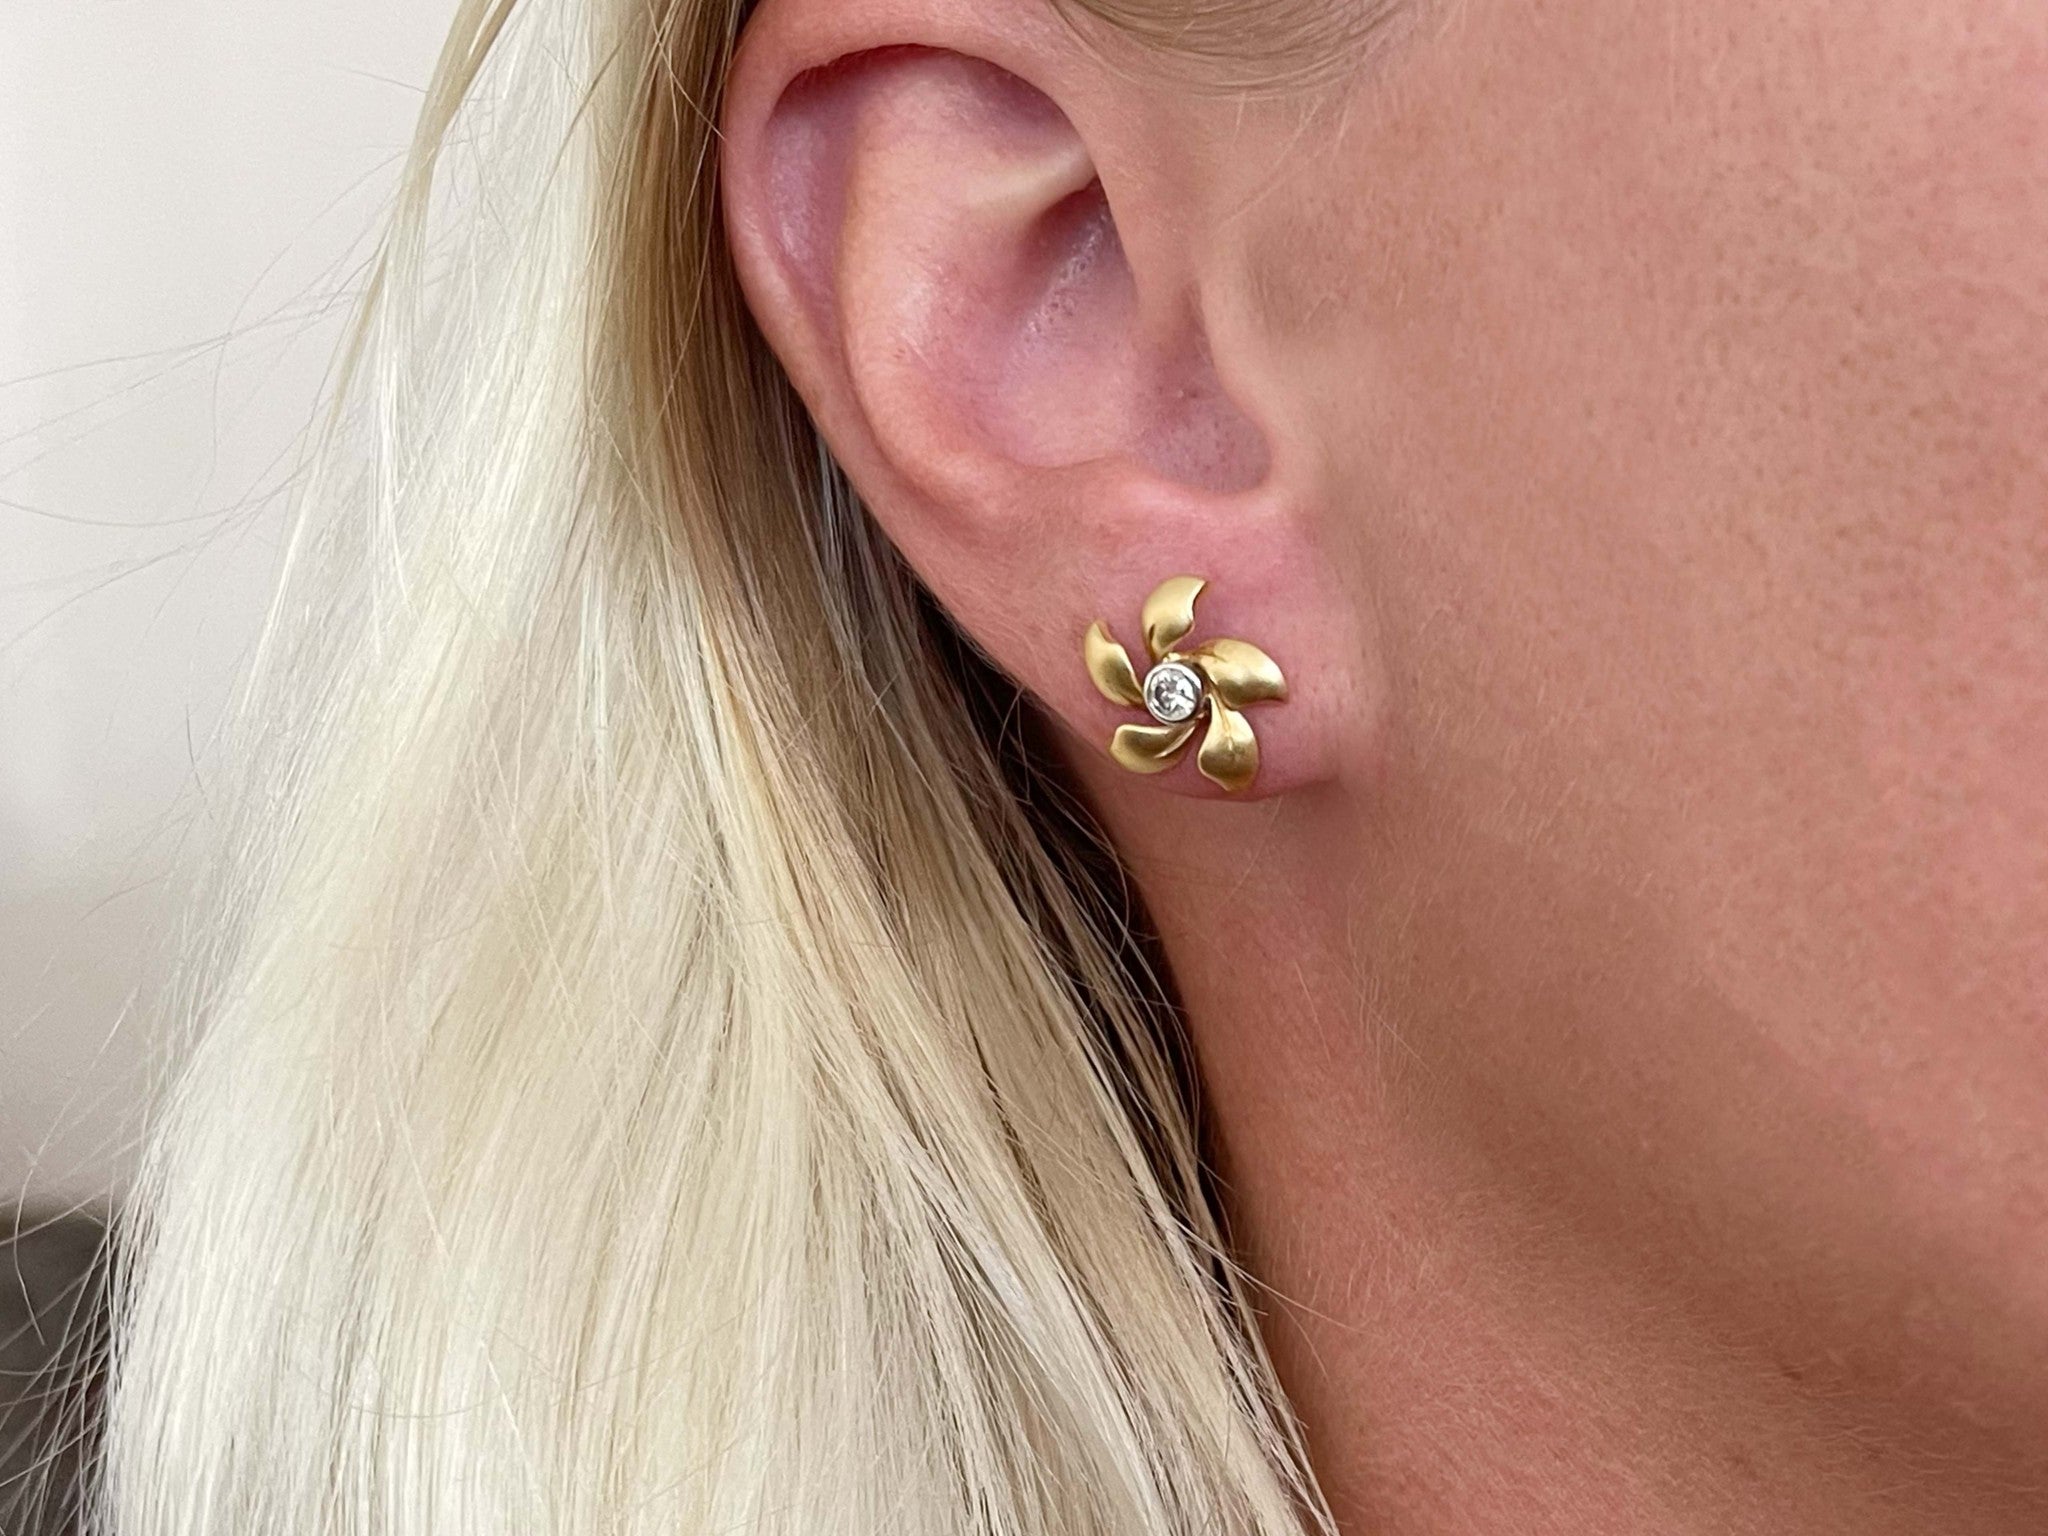 Flower and Diamond Stud Earrings in Satin Finish 14K Yellow Gold